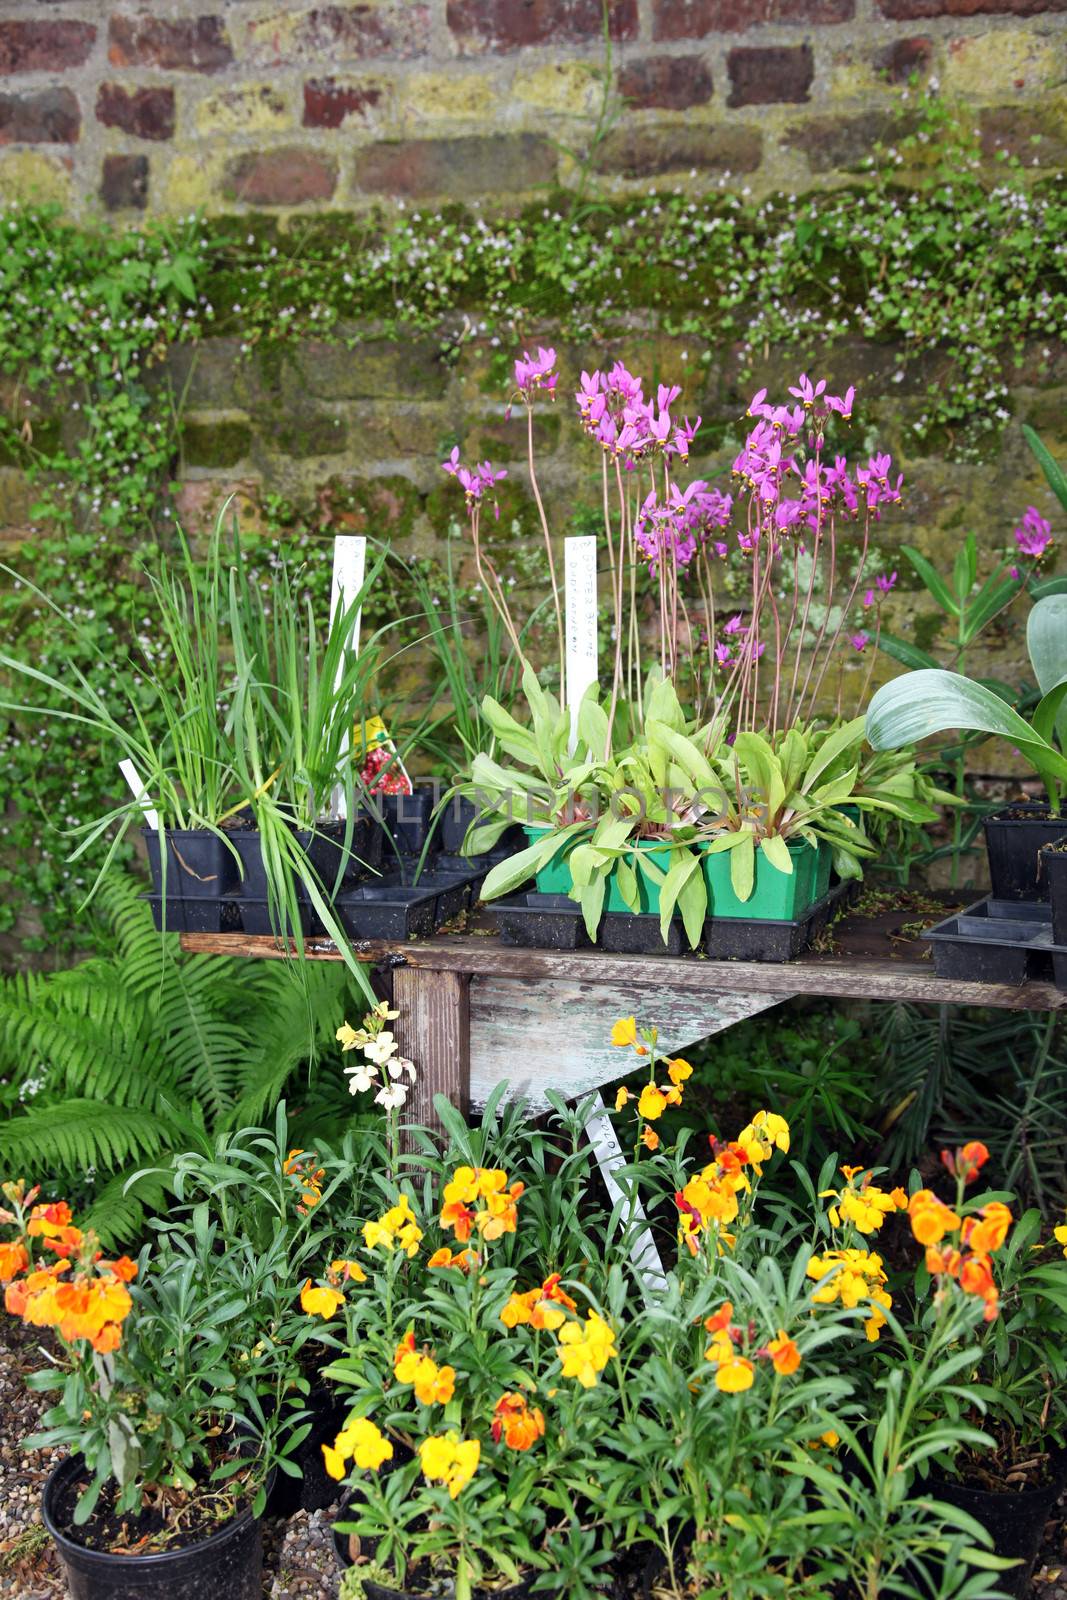 Potted colourful flowering plants and herbs in a garden standing against an old brick wall